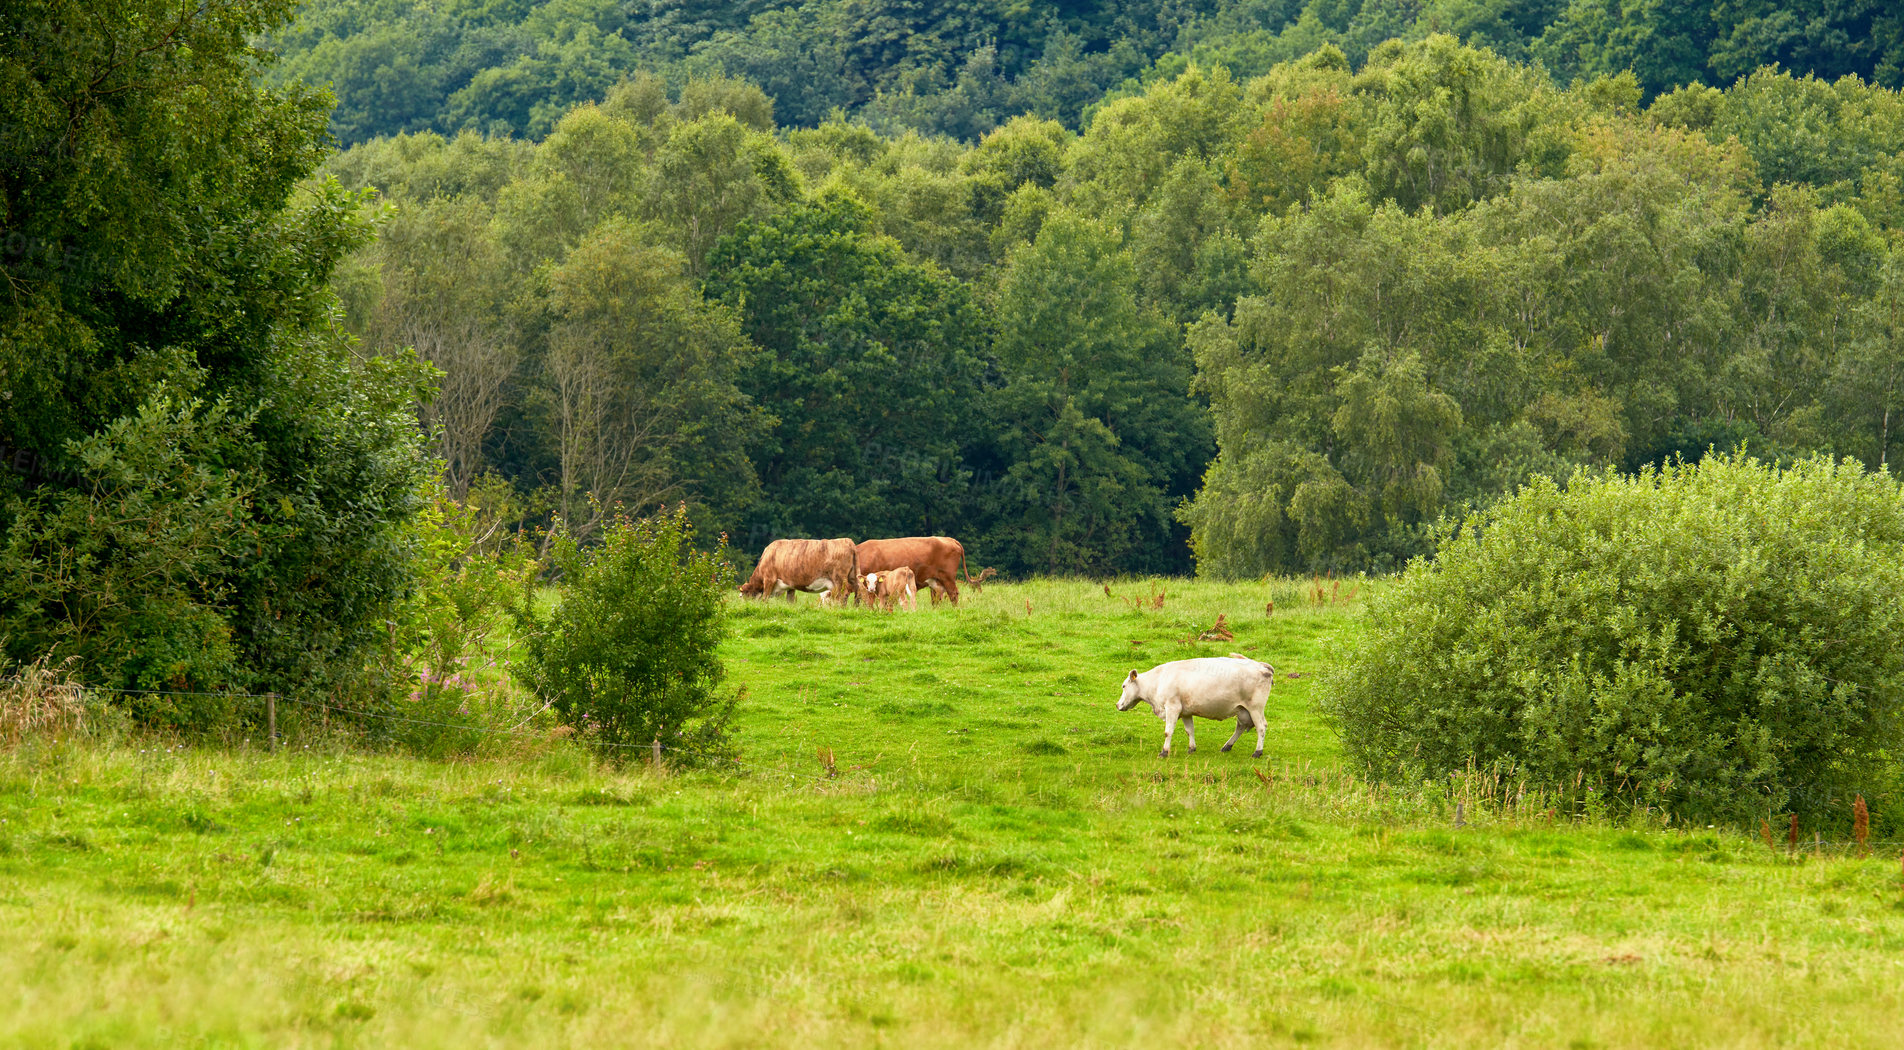 Buy stock photo Brown and white cows on a field with trees in the background and copy space. Cattle or livestock animals on sustainable agricultural farmland for dairy, beef, or meat industry with copyspace